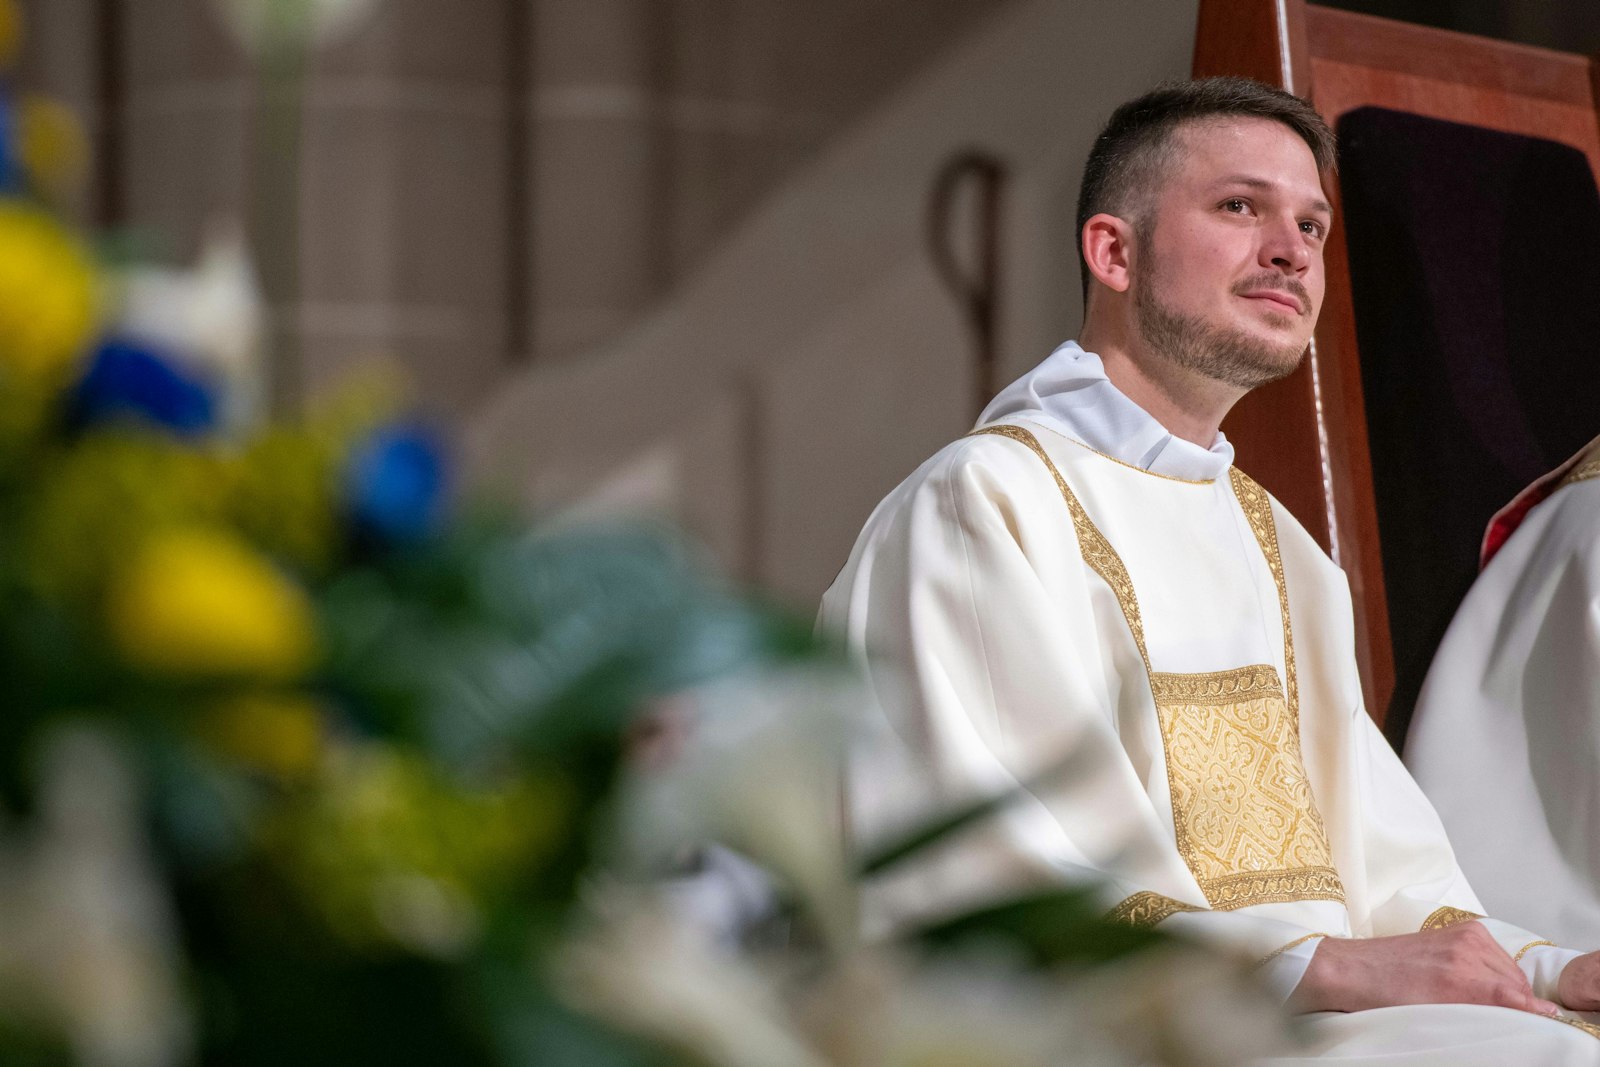 Deacon Ryan Walters, pictured during his ordination Mass, left the seminary for a few years, during which he discerned a possible vocation to marriage, but the idea of priesthood never left him, he said.